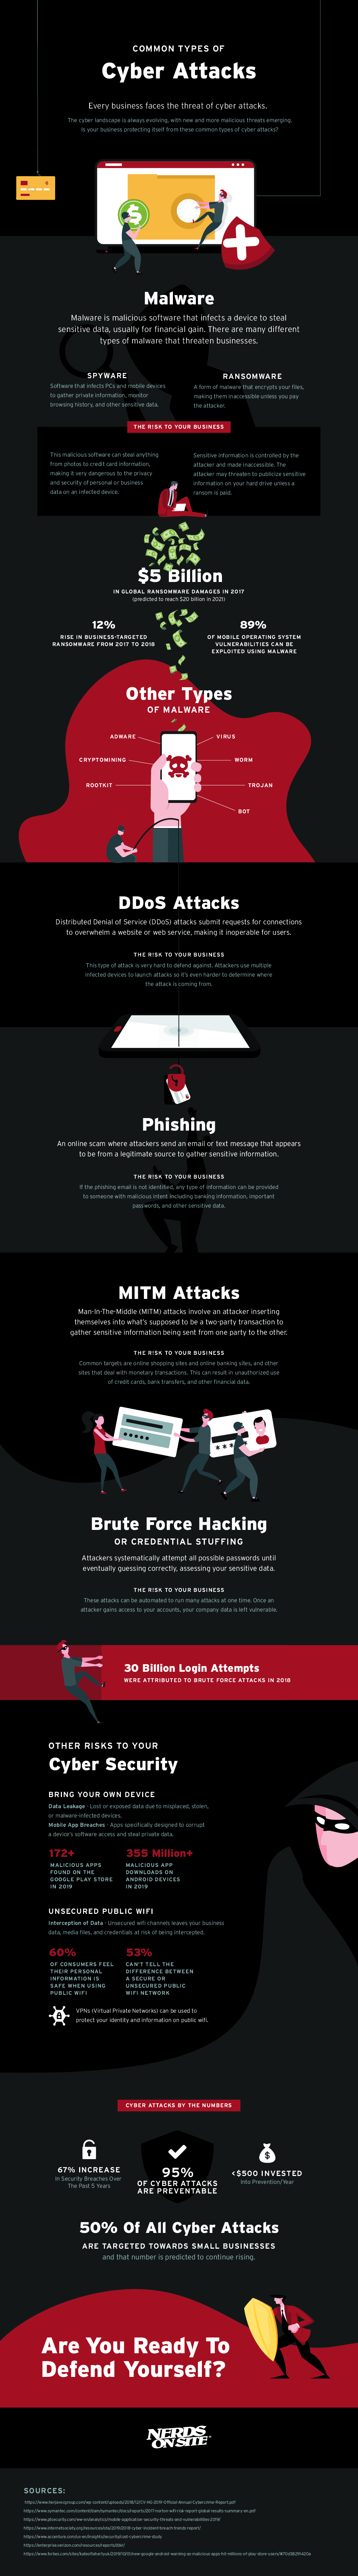 Types Of Cyber Attacks Infographic - Nerds On Site